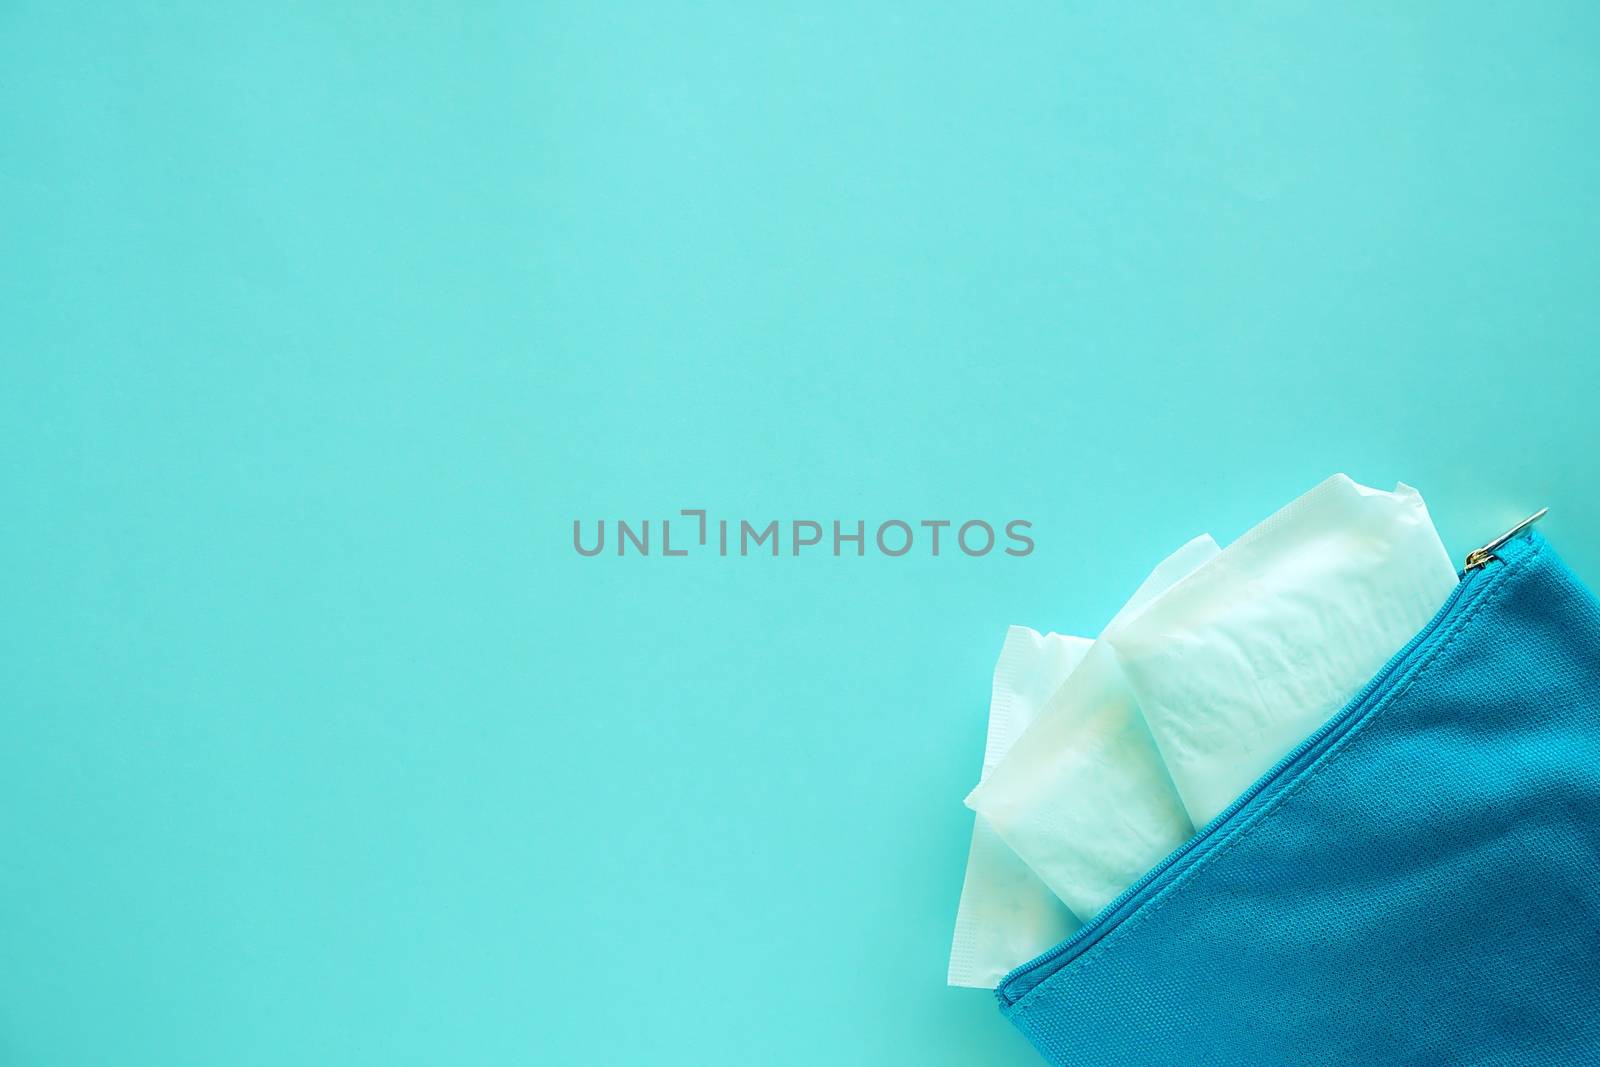 Sanitary napkin in women's fabric bag on blue background for hygiene and health concept